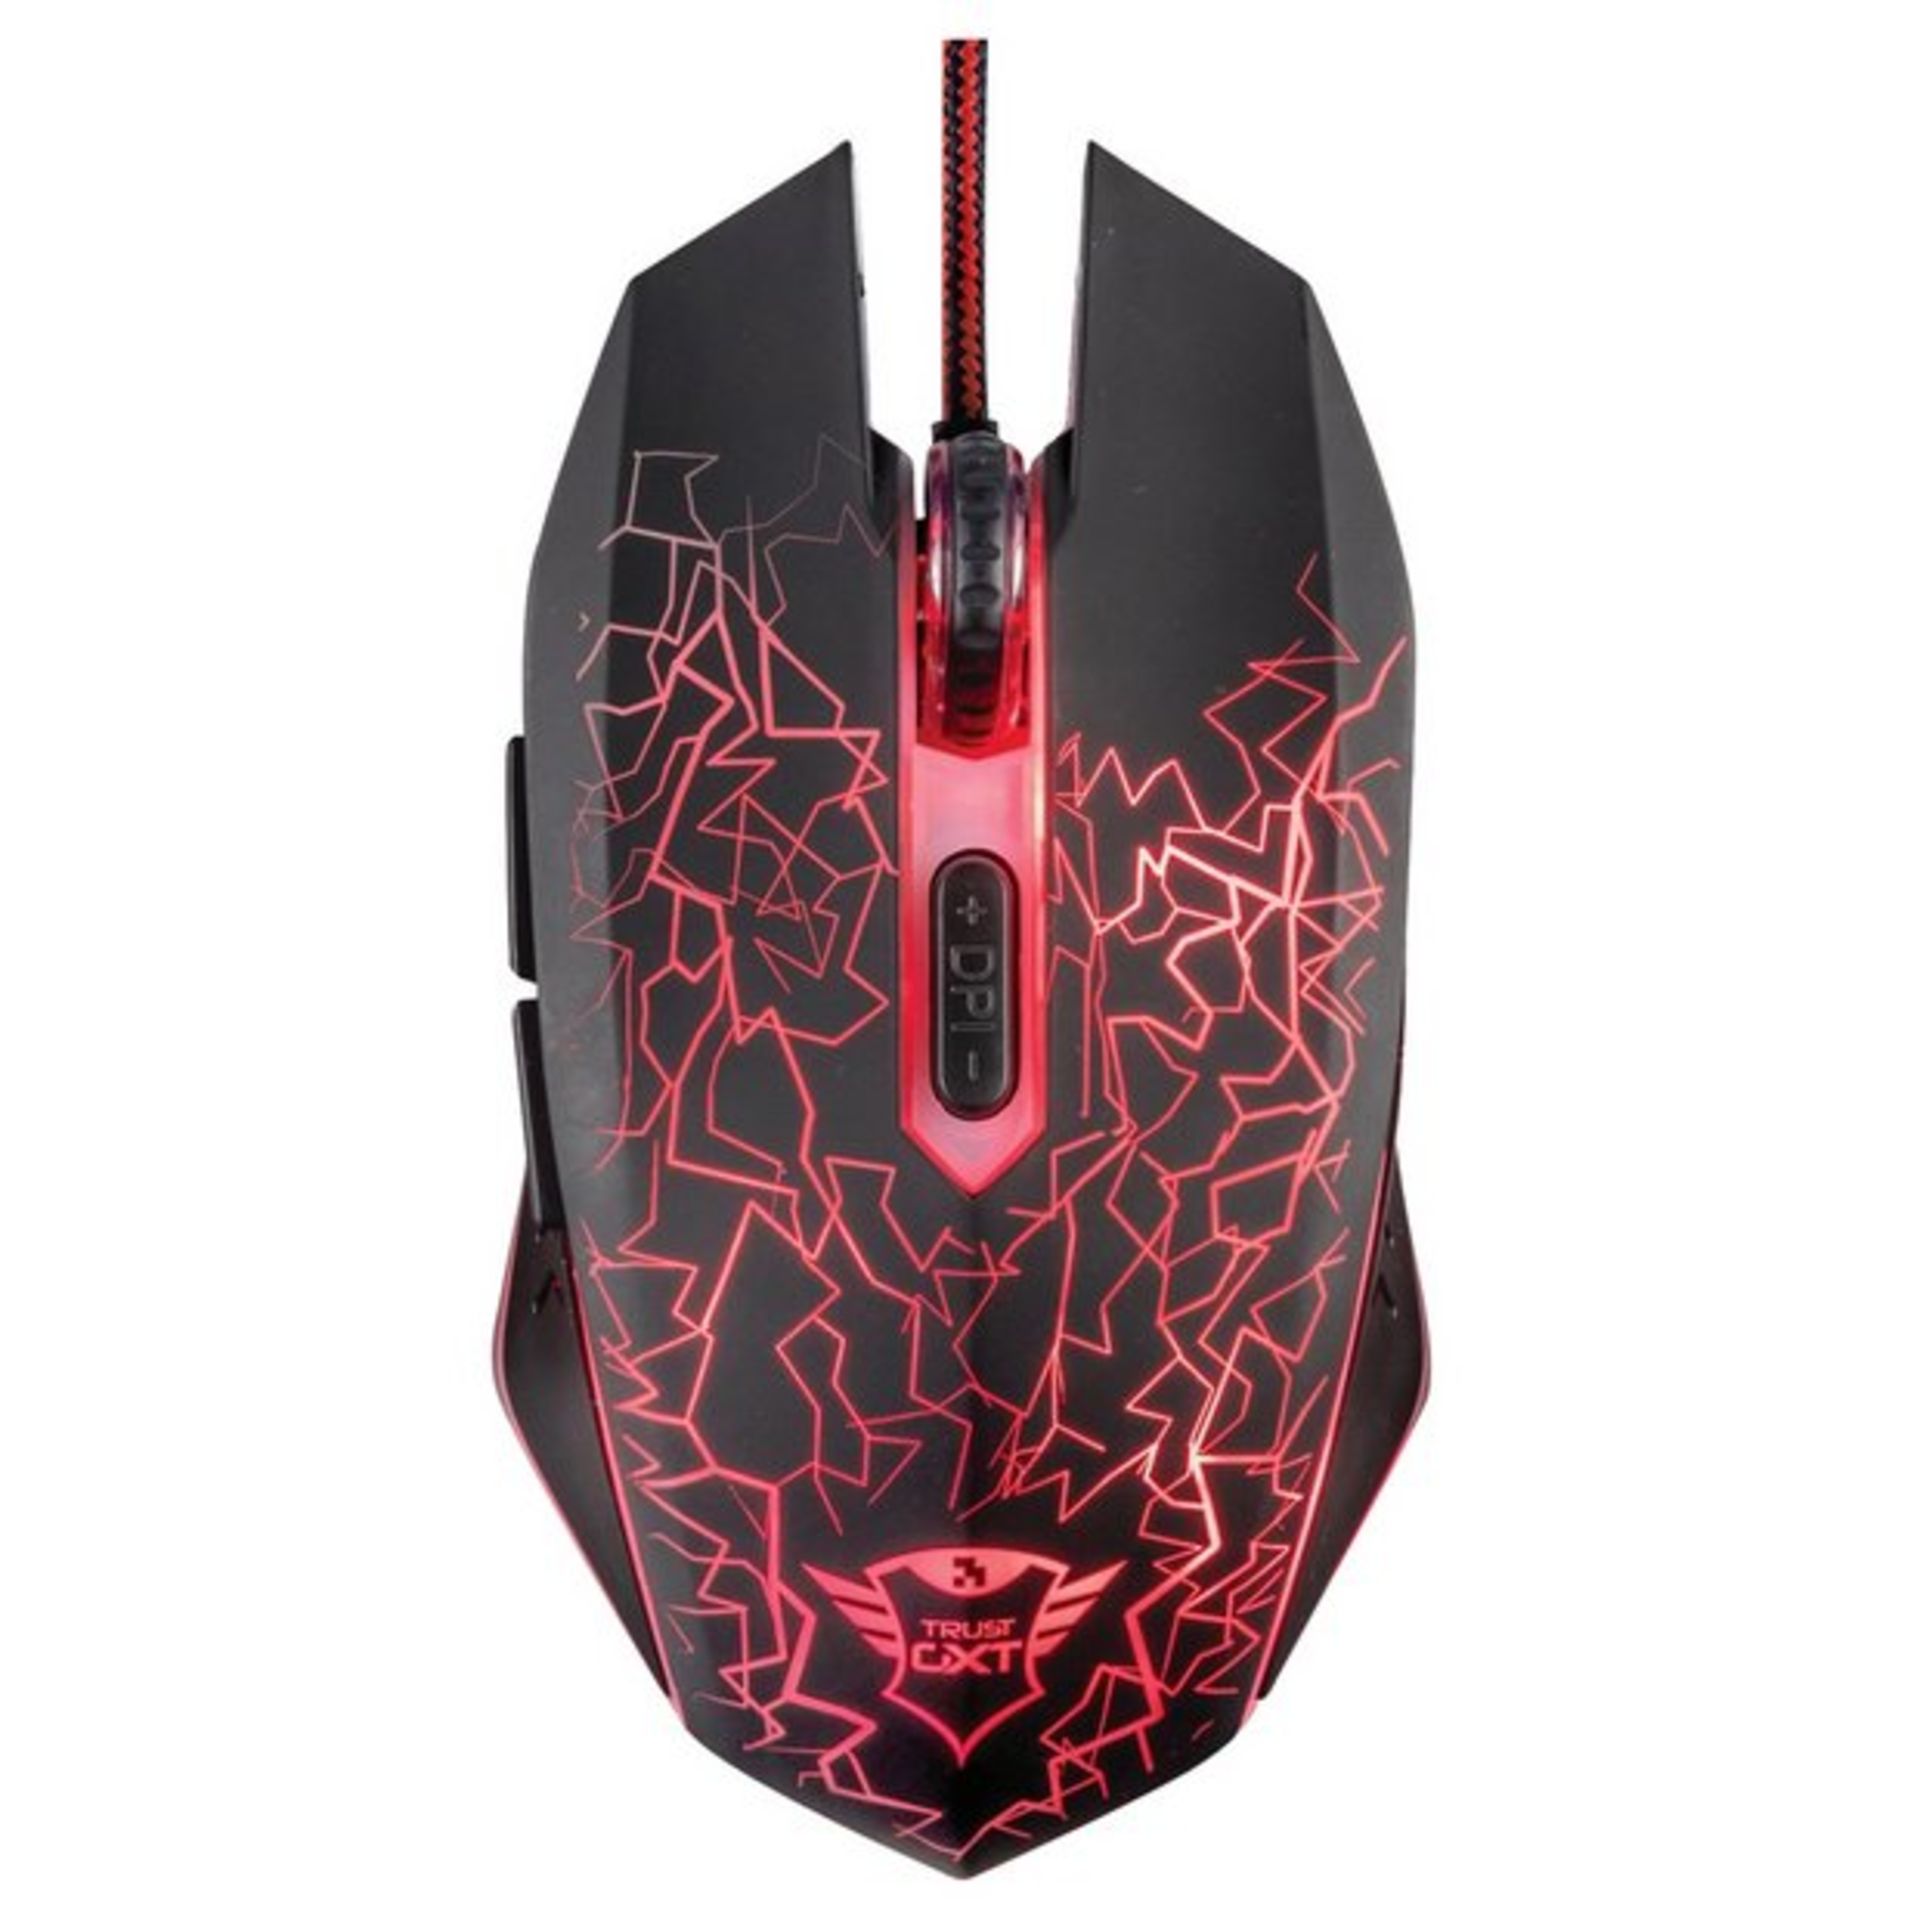 (P2) 5x Trust Gaming GXT Izza Illuminated Mouse. (Units Have Return To Manufacturer Sticker).